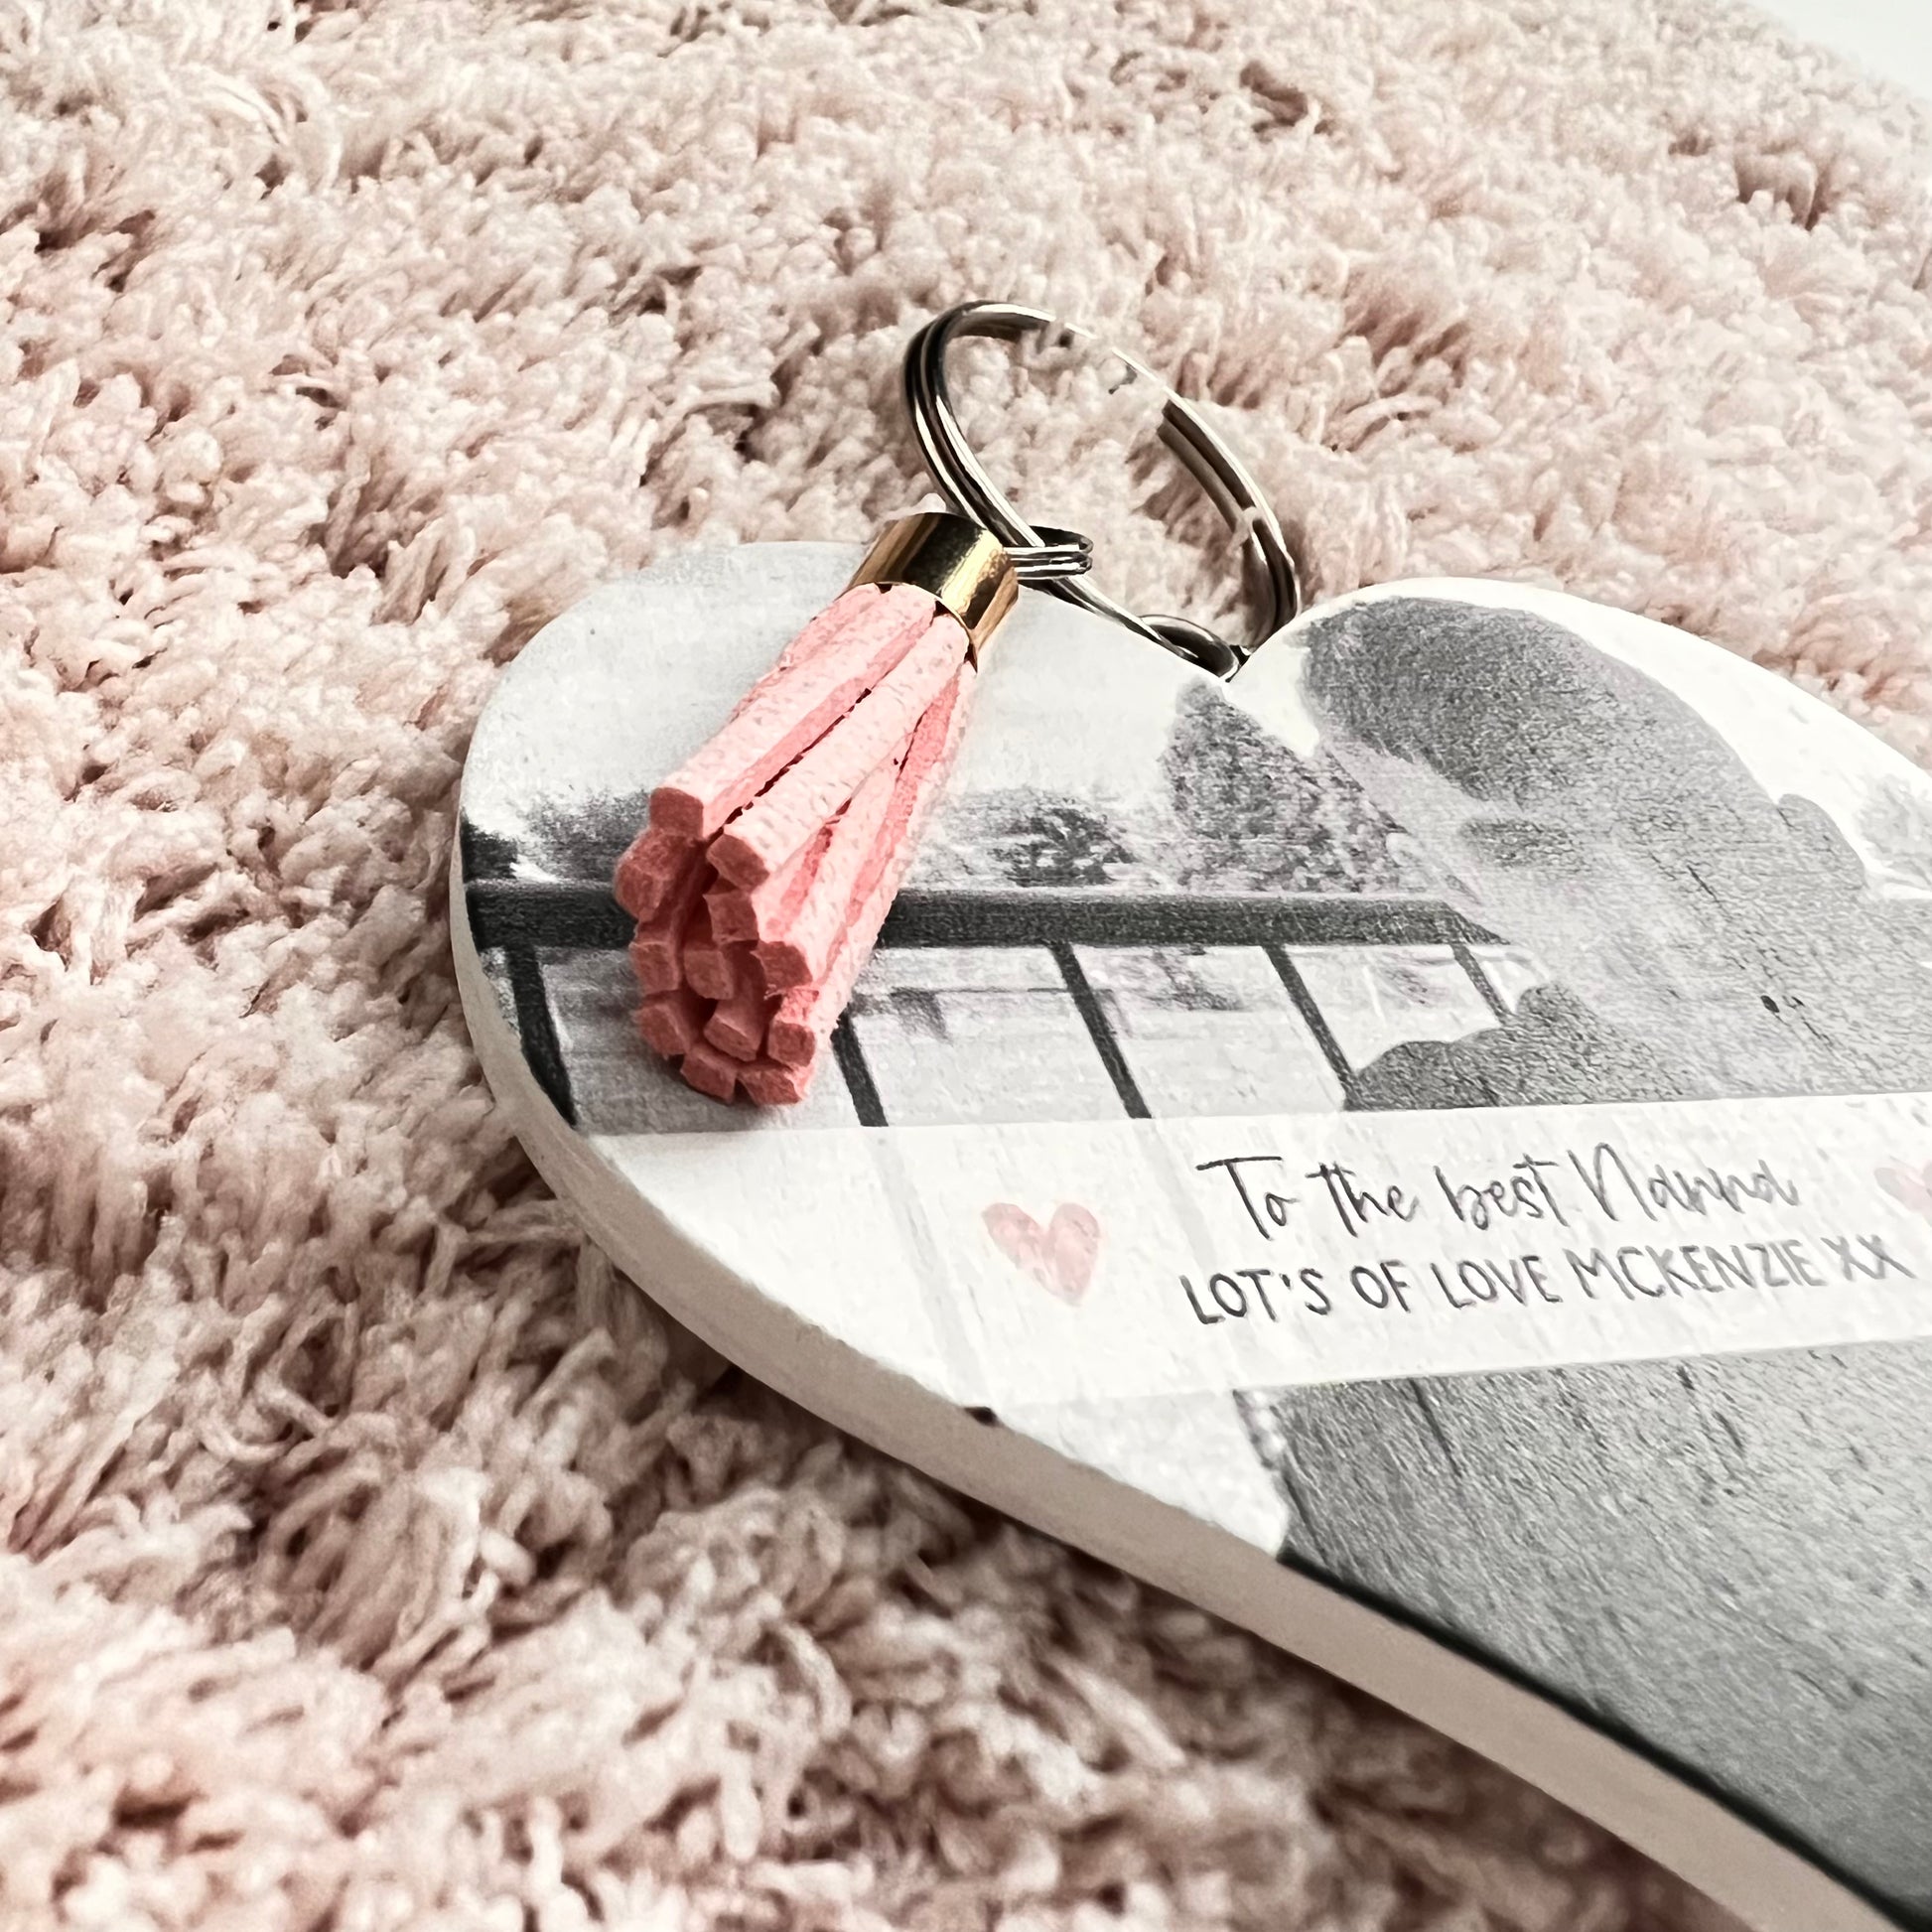 Mdf heart shaped keyring with a pink tassel, featuring a photo of a boy & a custom text underneath in a white banner which reads 'to the best nanna, lot's of love Mckenzie x'.